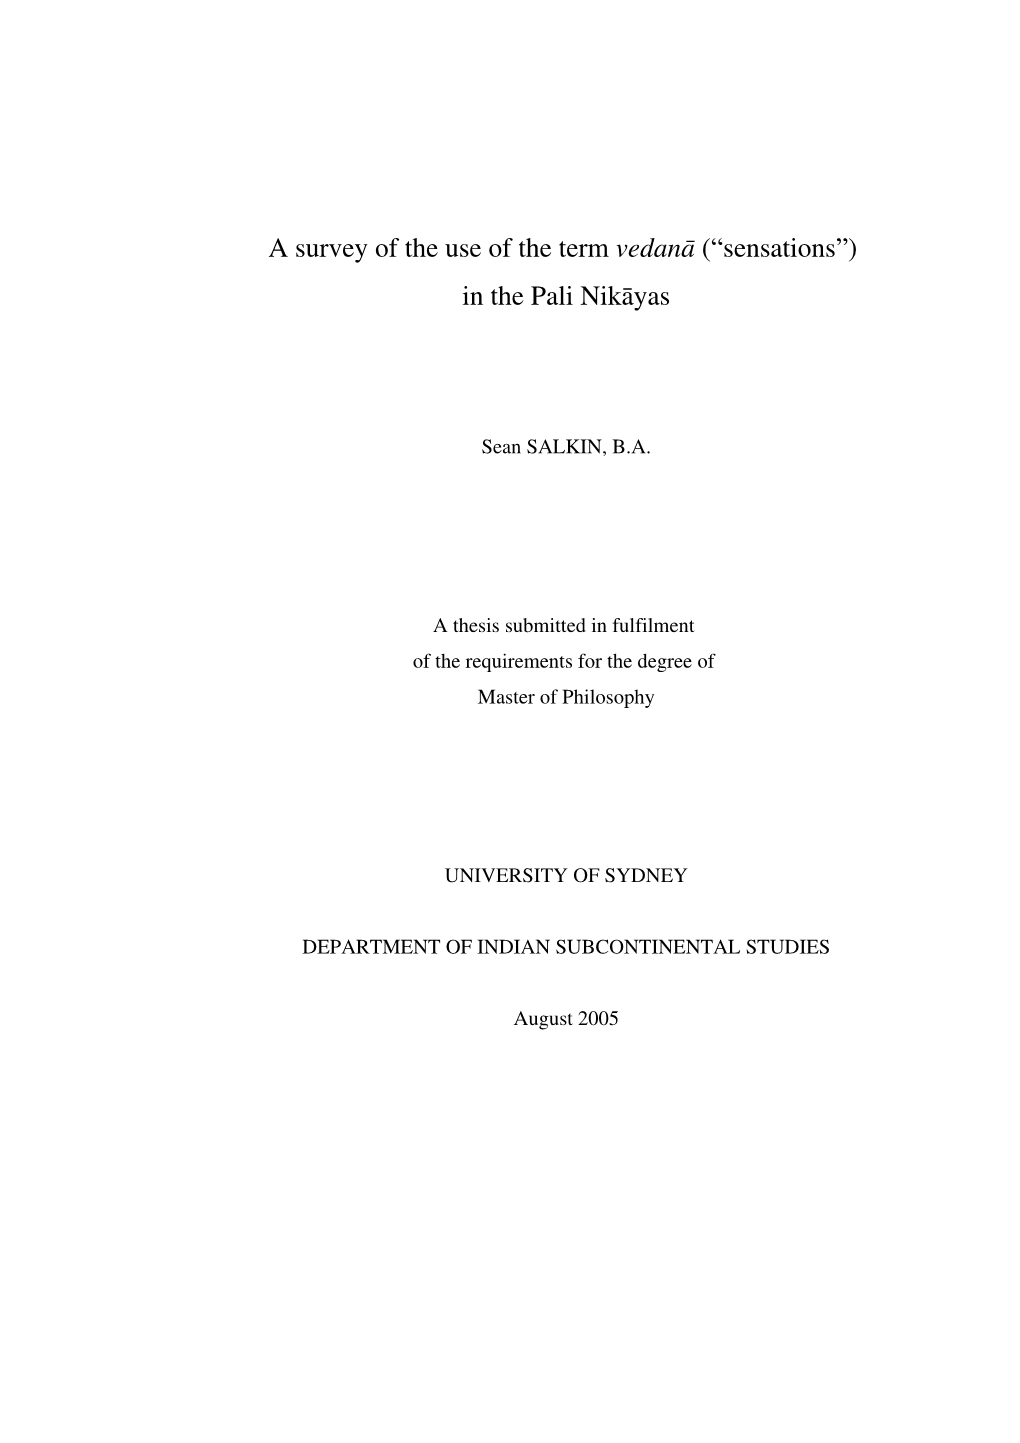 A Survey of the Use of the Term Vedanà (“Sensations”) in the Pali Nikàyas